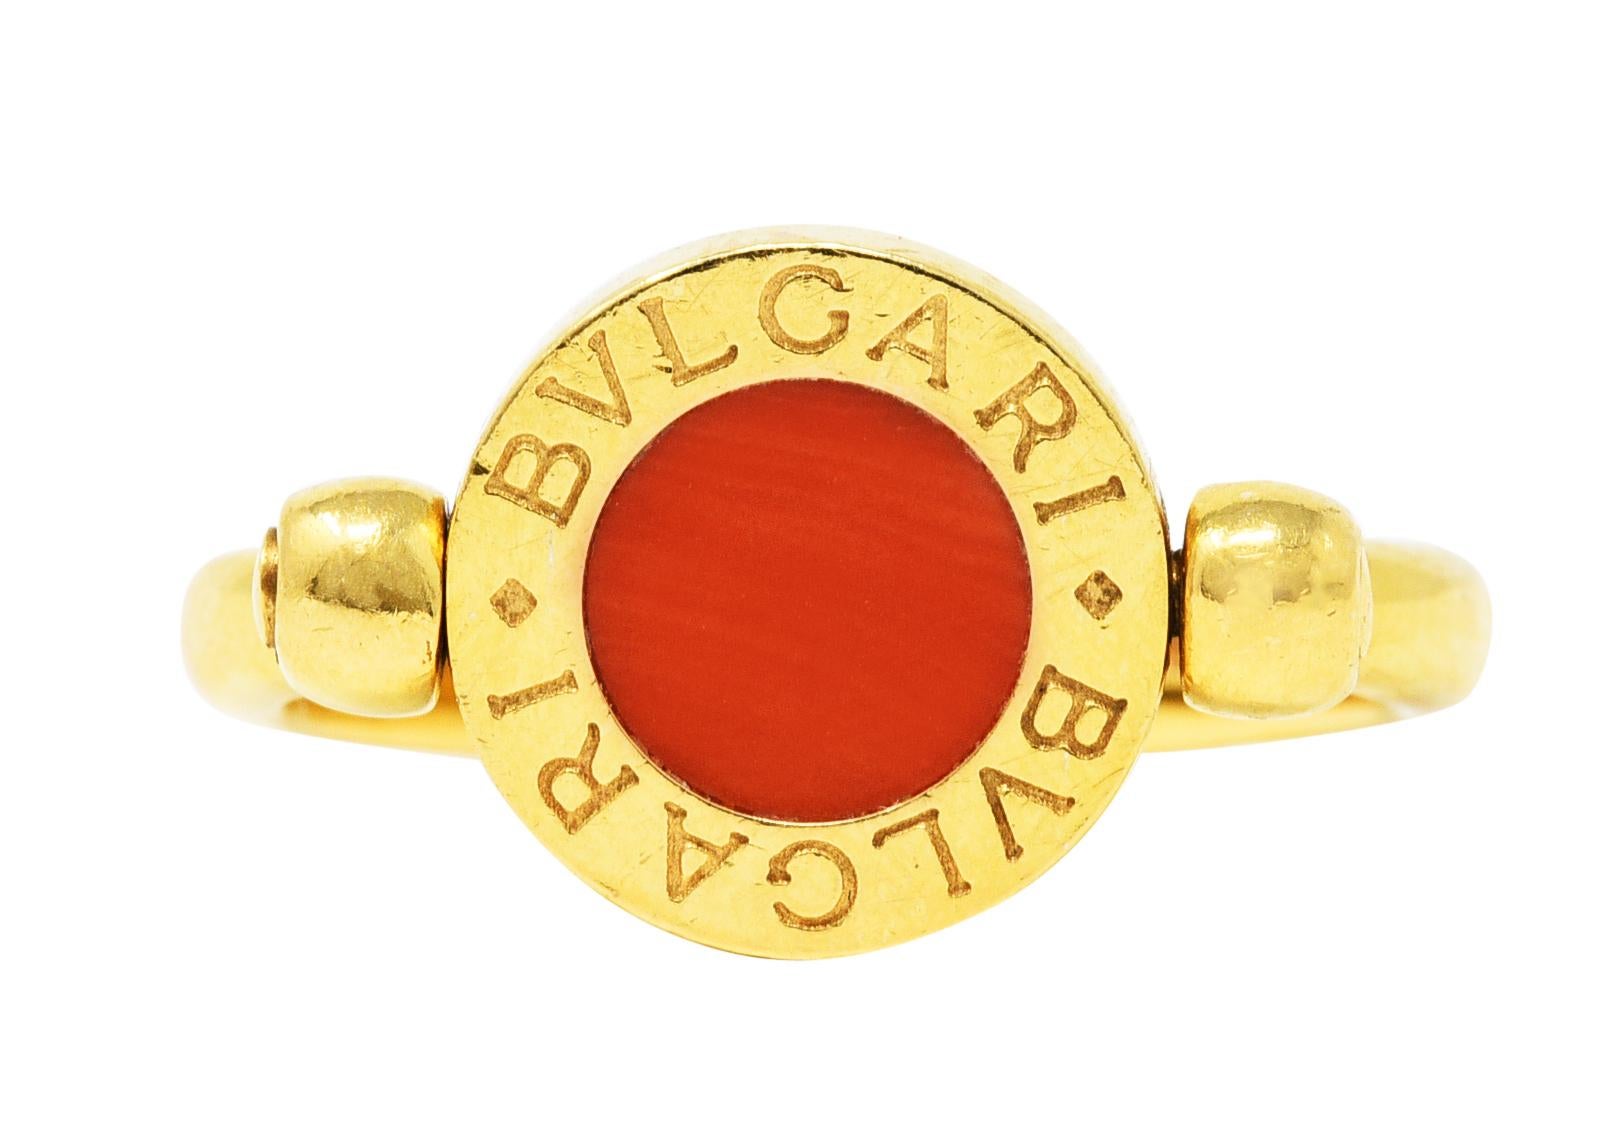 Band ring centers an 11.0 mm circular center that flips on an axis

One side features an inlaid circular tablet of coral - opaque with pastel reddish orange color

Opposite side features an inlaid circular tablet of onyx - opaque black with